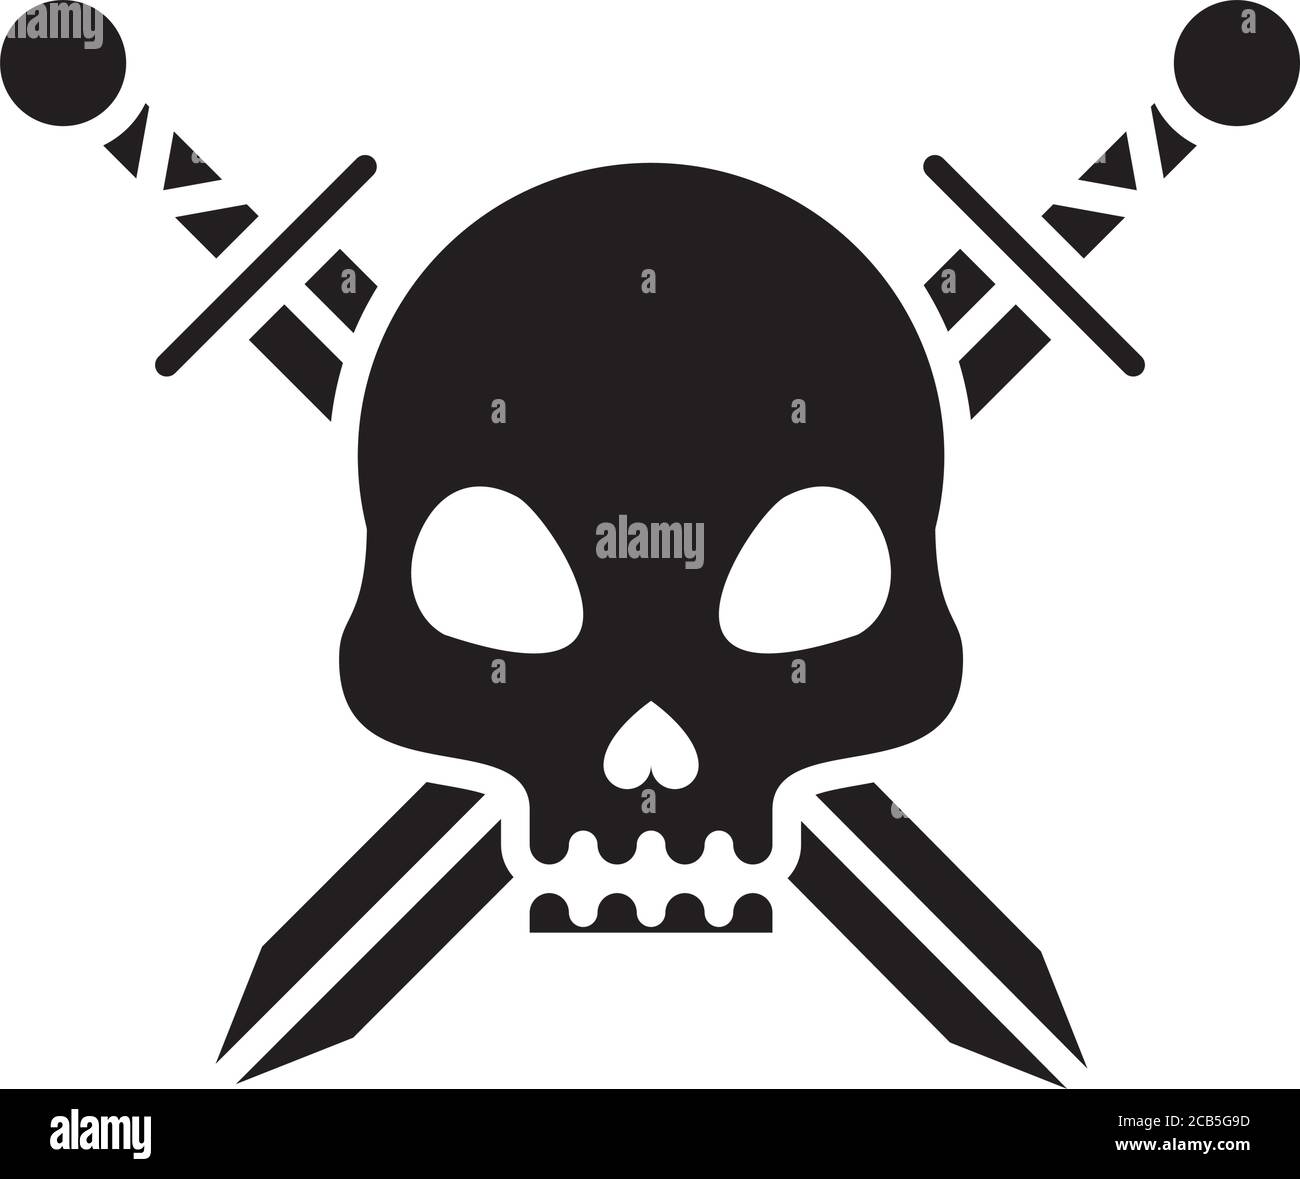 death skull head with swords crossed silhouette style icon vector illustration design Stock Vector